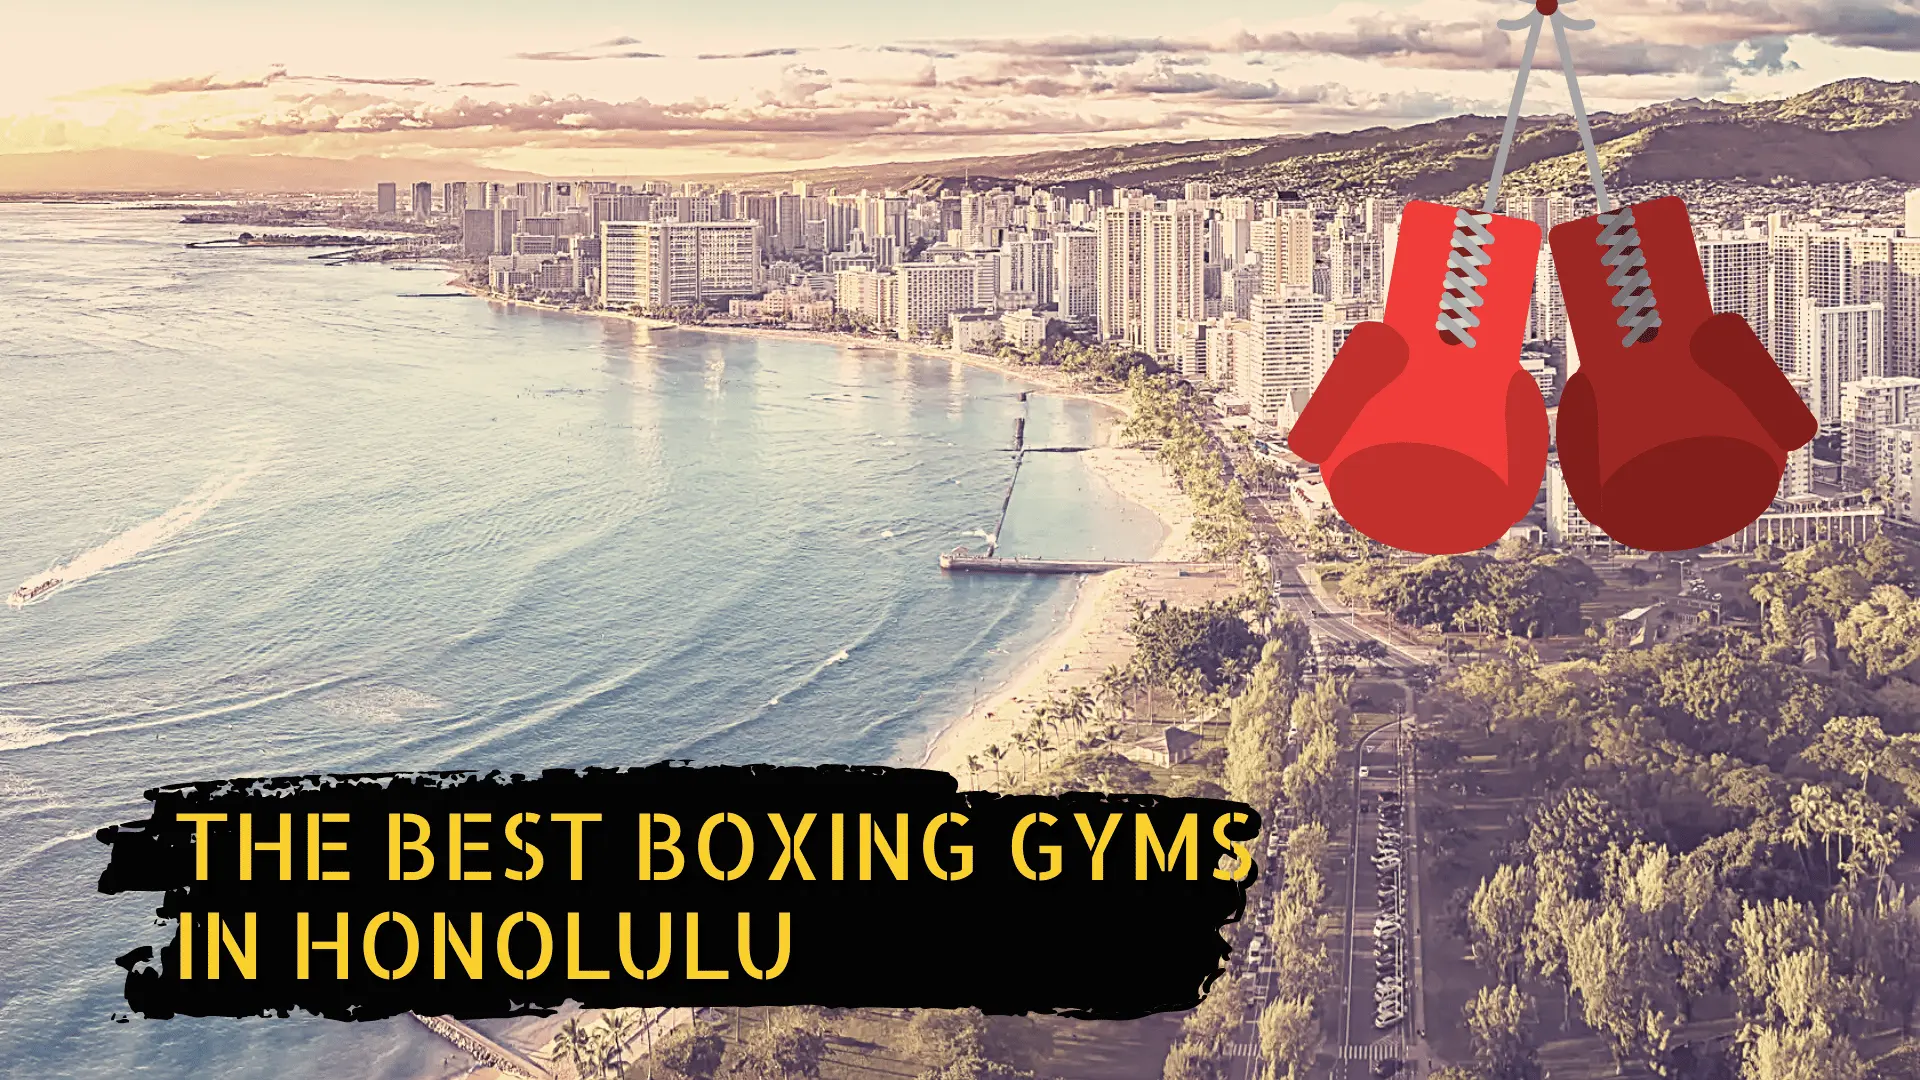 A picture of Honolulu and some boxing gloves with the title "The best boxing gyms in Honolulu"